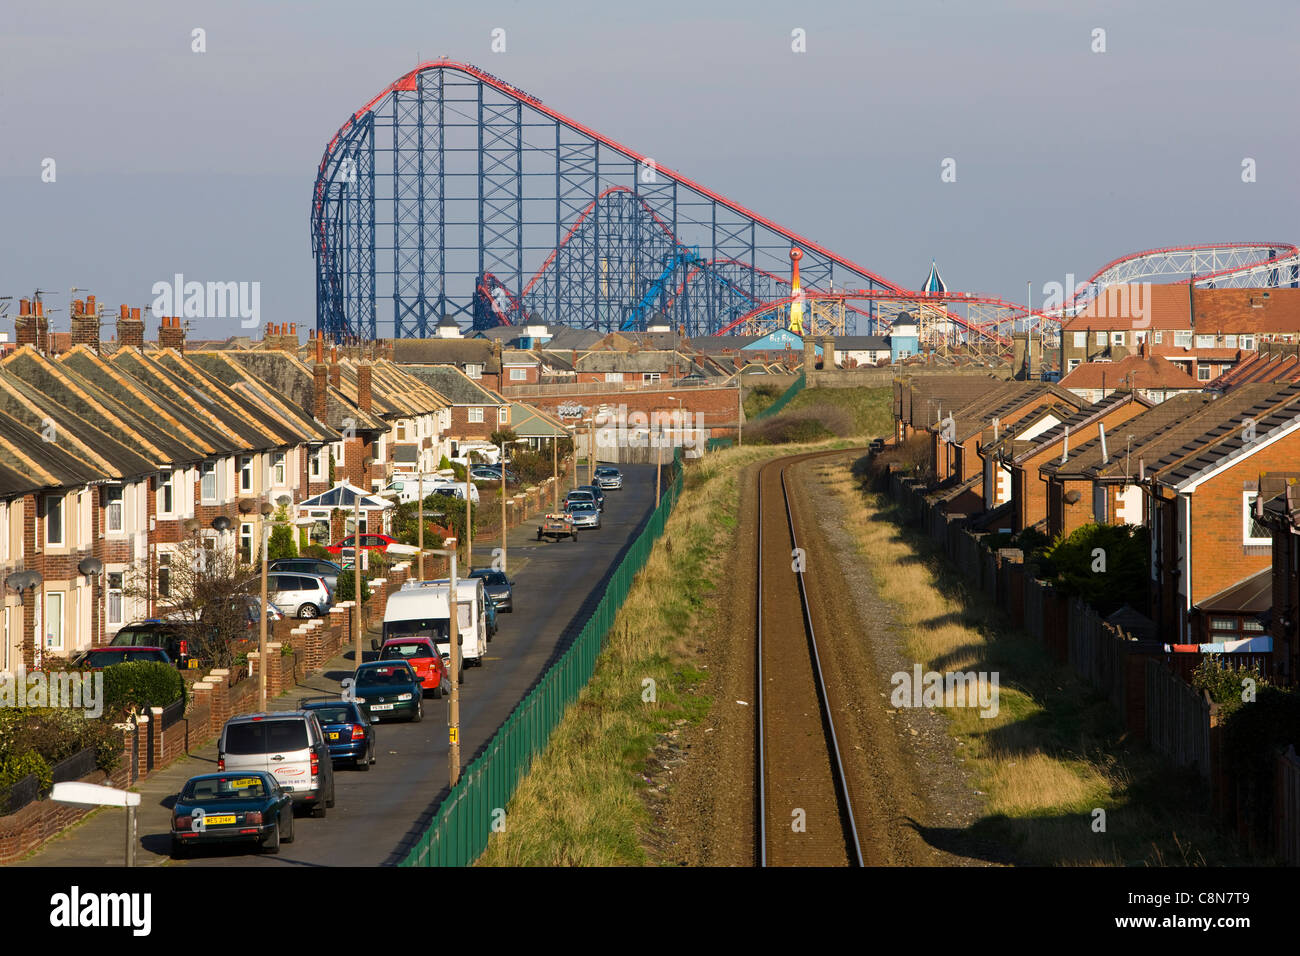 Railway line and rows of houses overshadowed by 'The Big One' roller coaster in Blackpool's Pleasure Beach Stock Photo